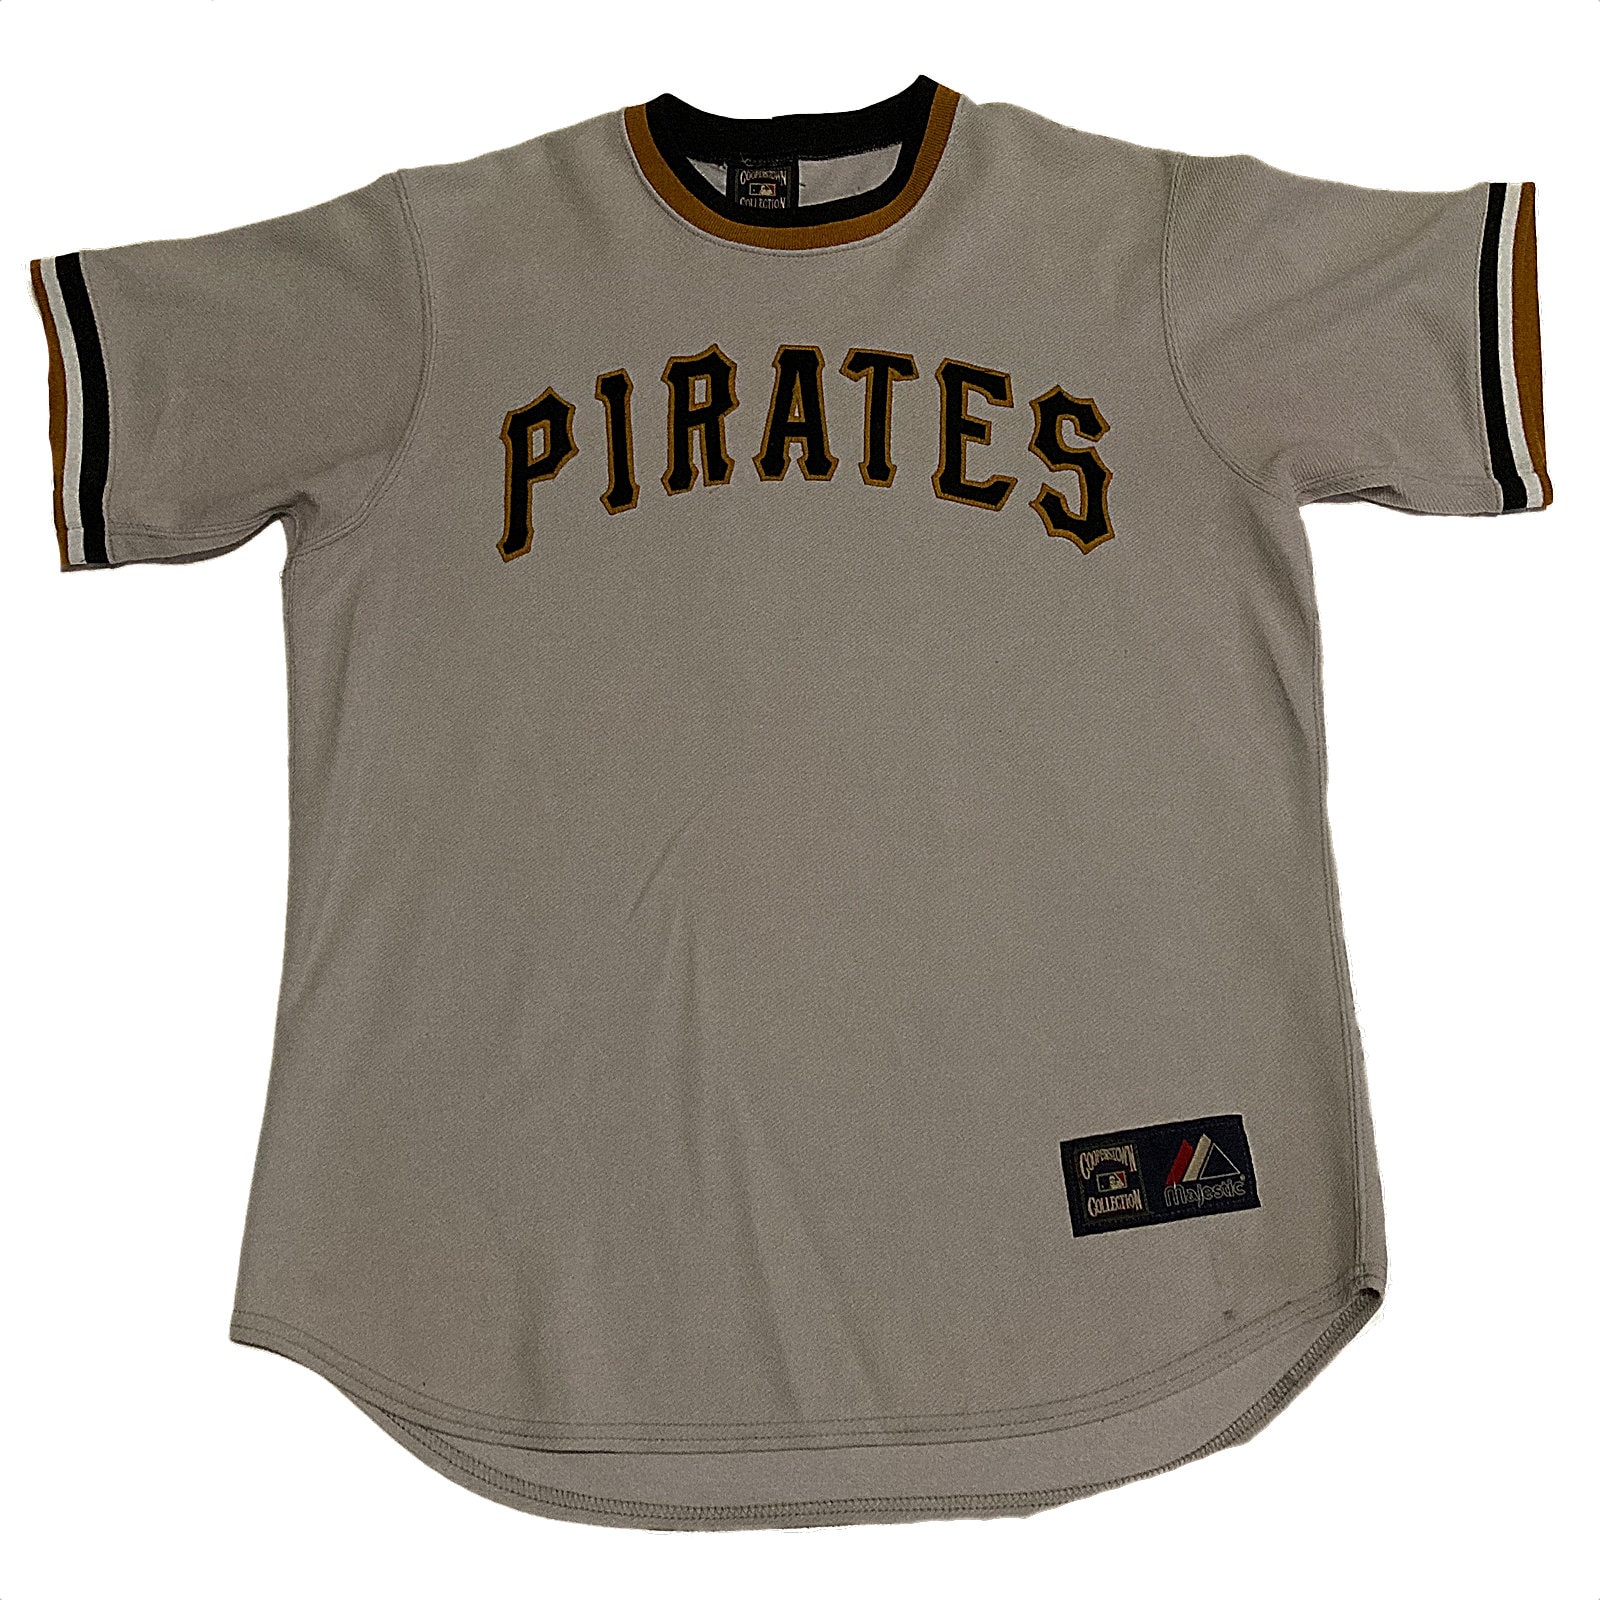 Willie Stargell Pittsburgh Pirates Majestic Cooperstown Collection Replica  Jersey